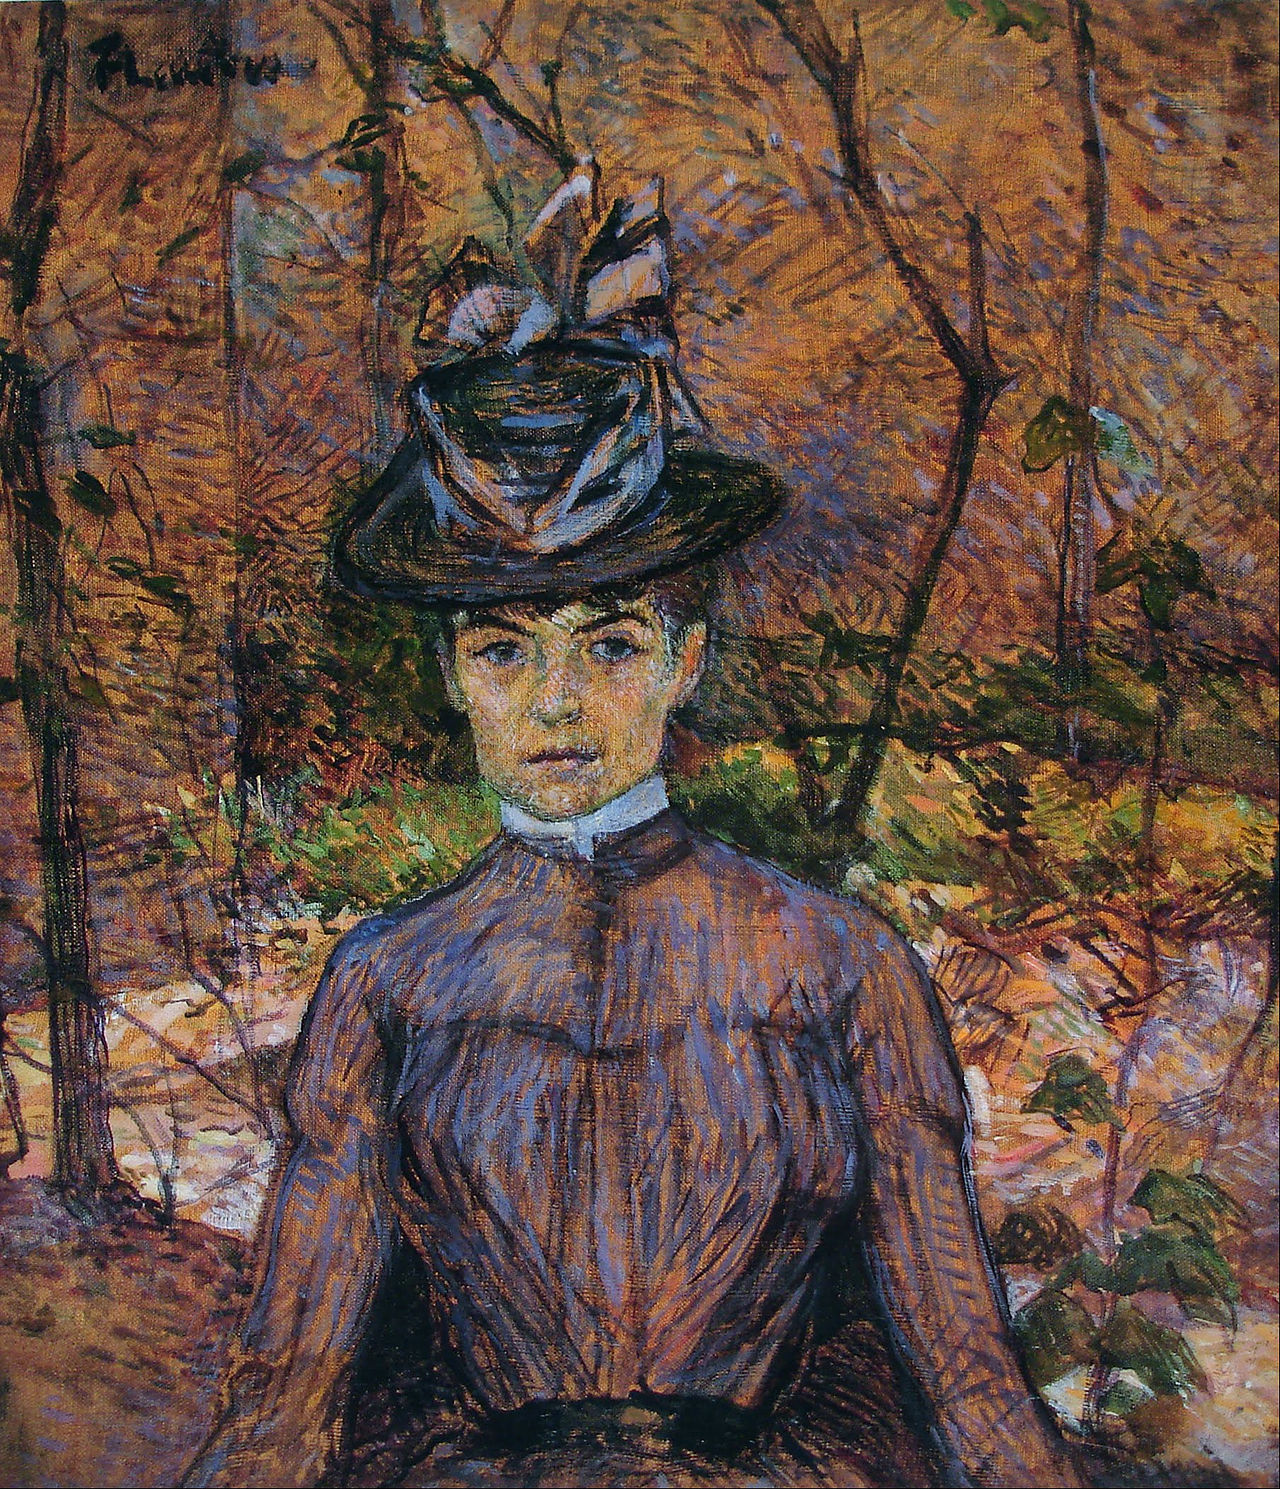 A portrait of Valadon by Toulouse-Lautrec, now in the National Museum